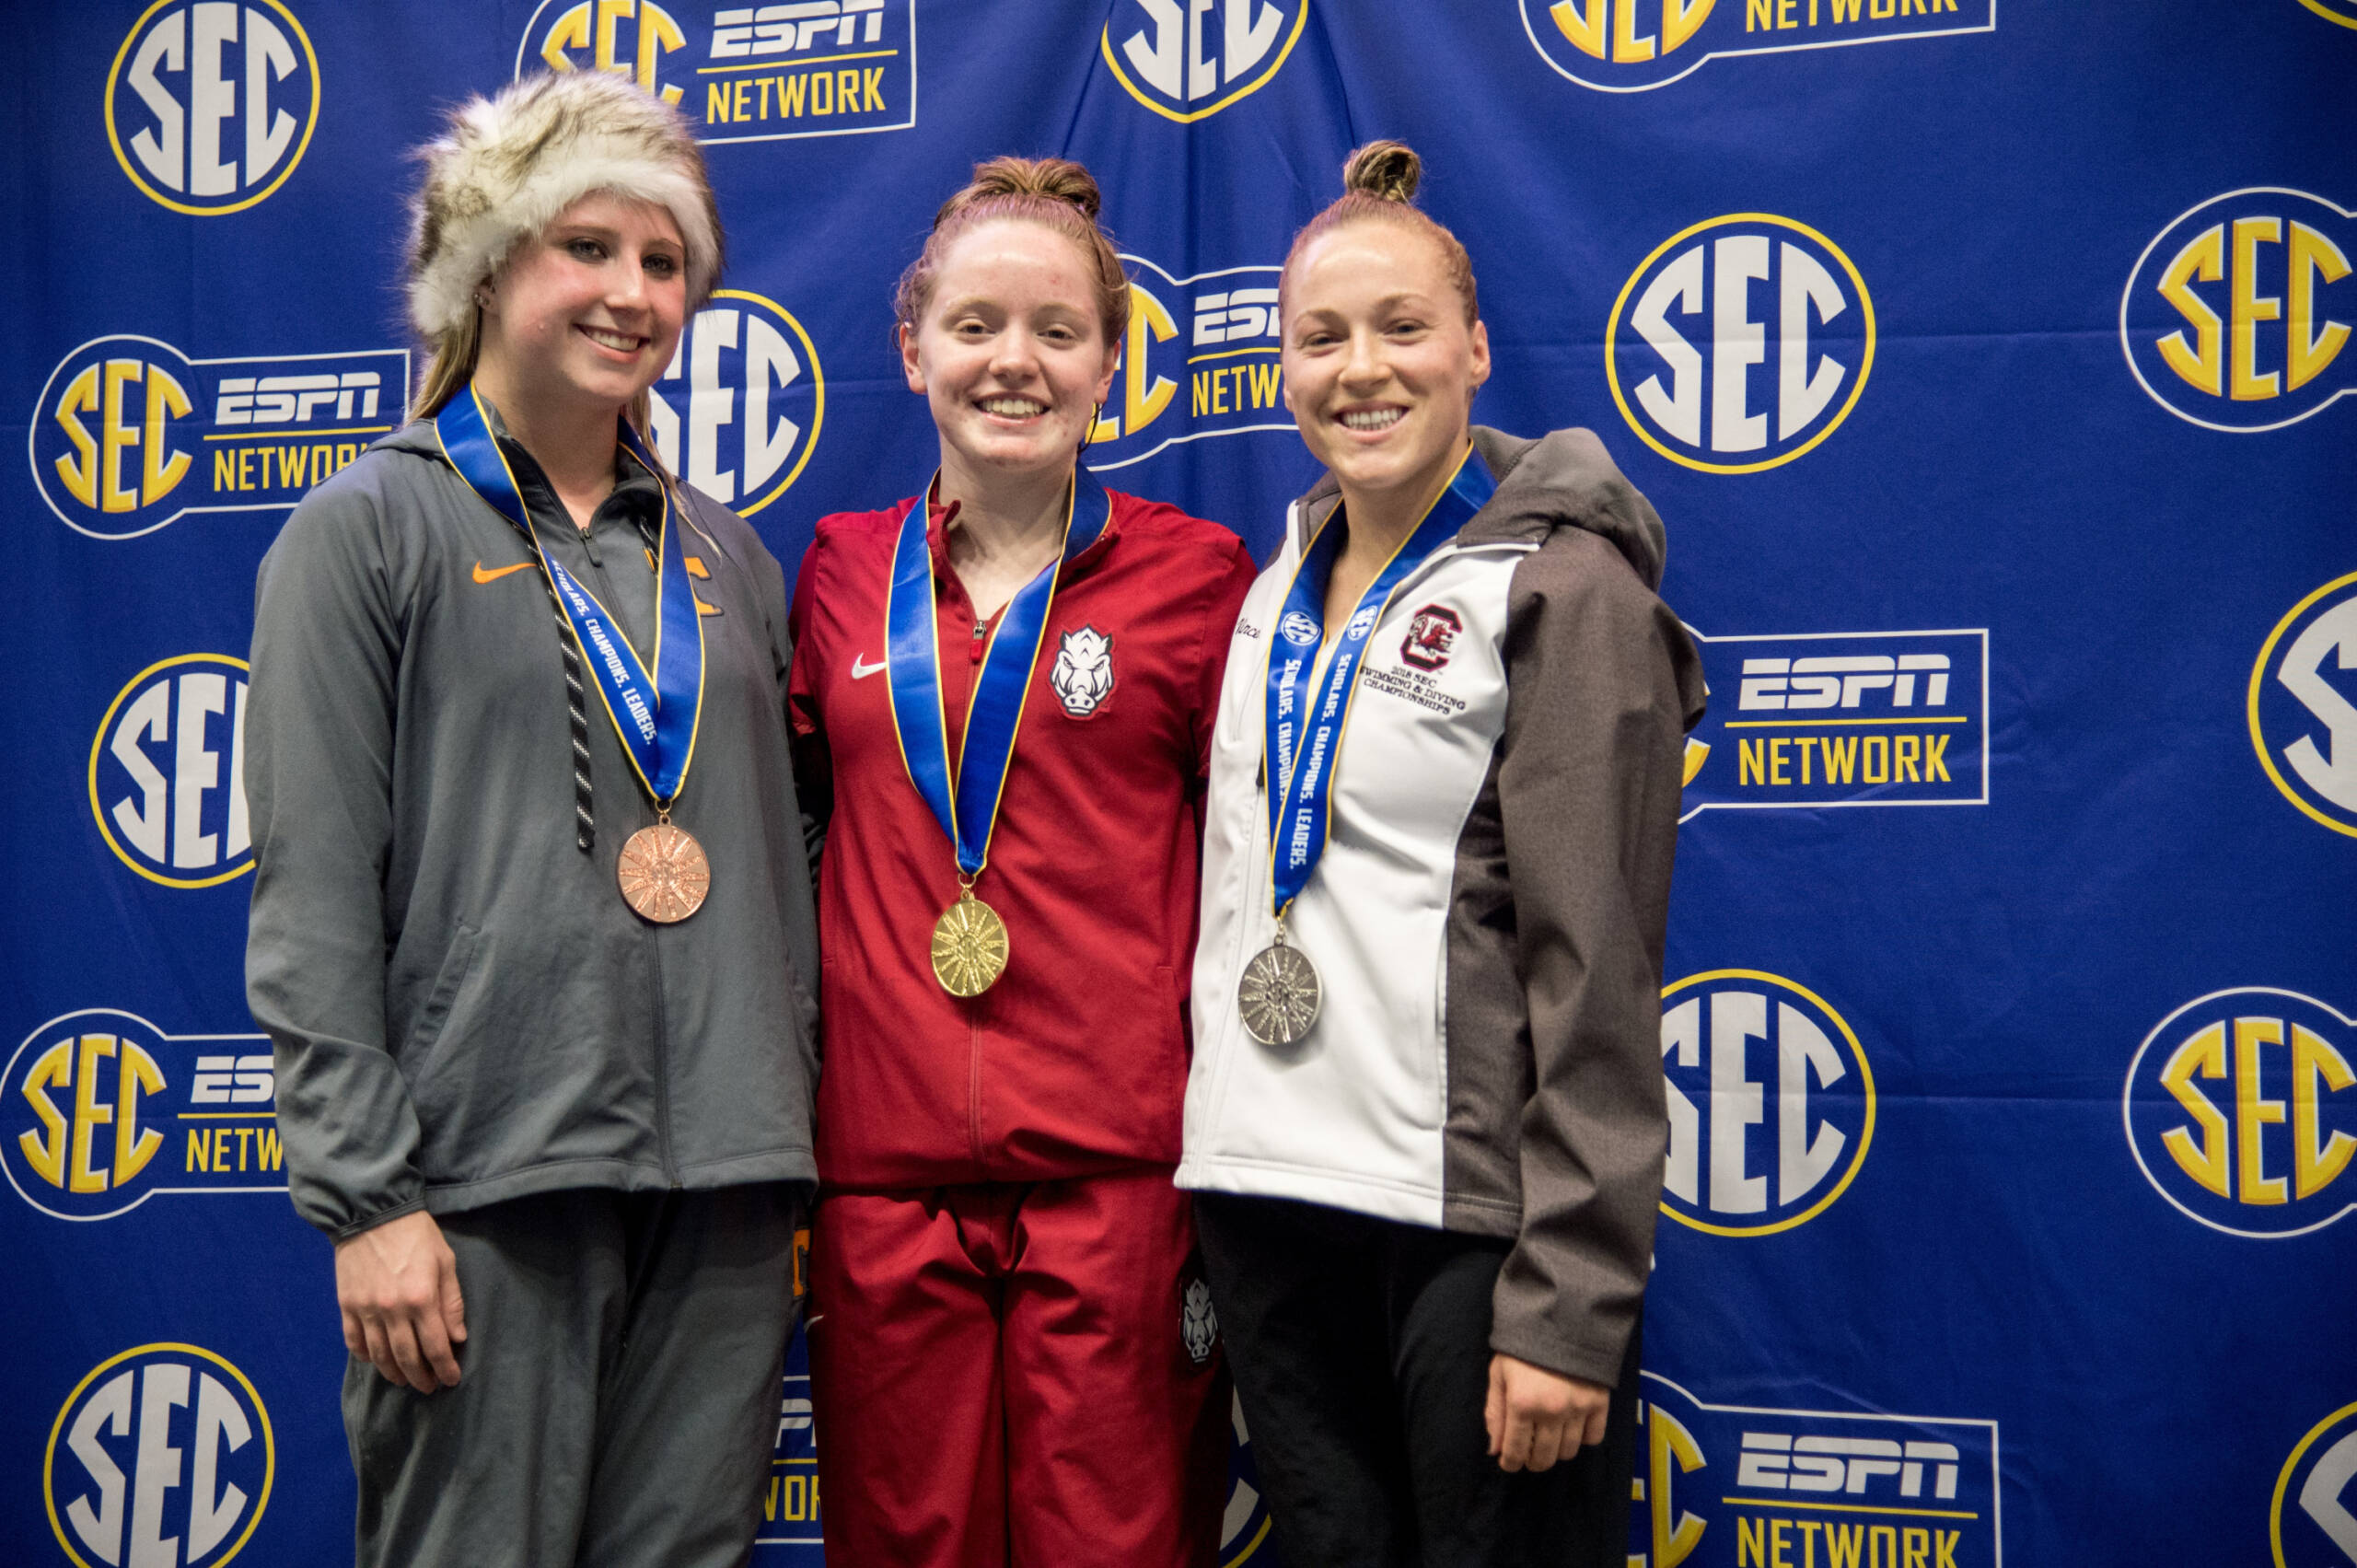 Gamecocks Earn Three Podium Places on Day 3 of SEC Championships